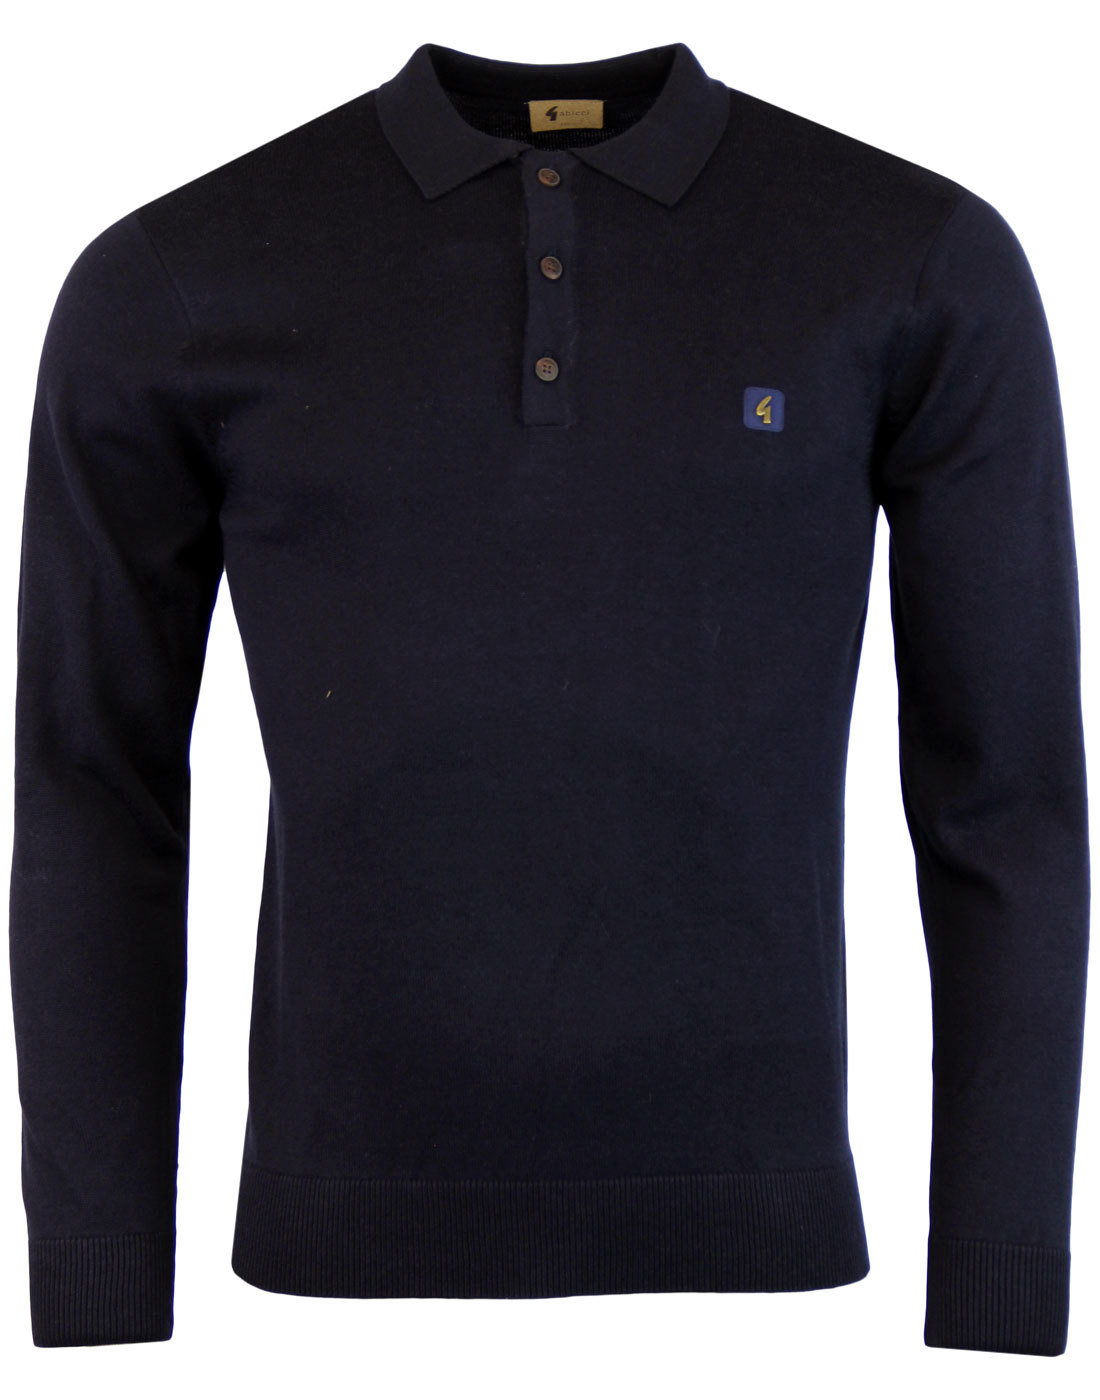 GABICCI VINTAGE Retro 1960s Mod Classic Knitted Polo in Navy